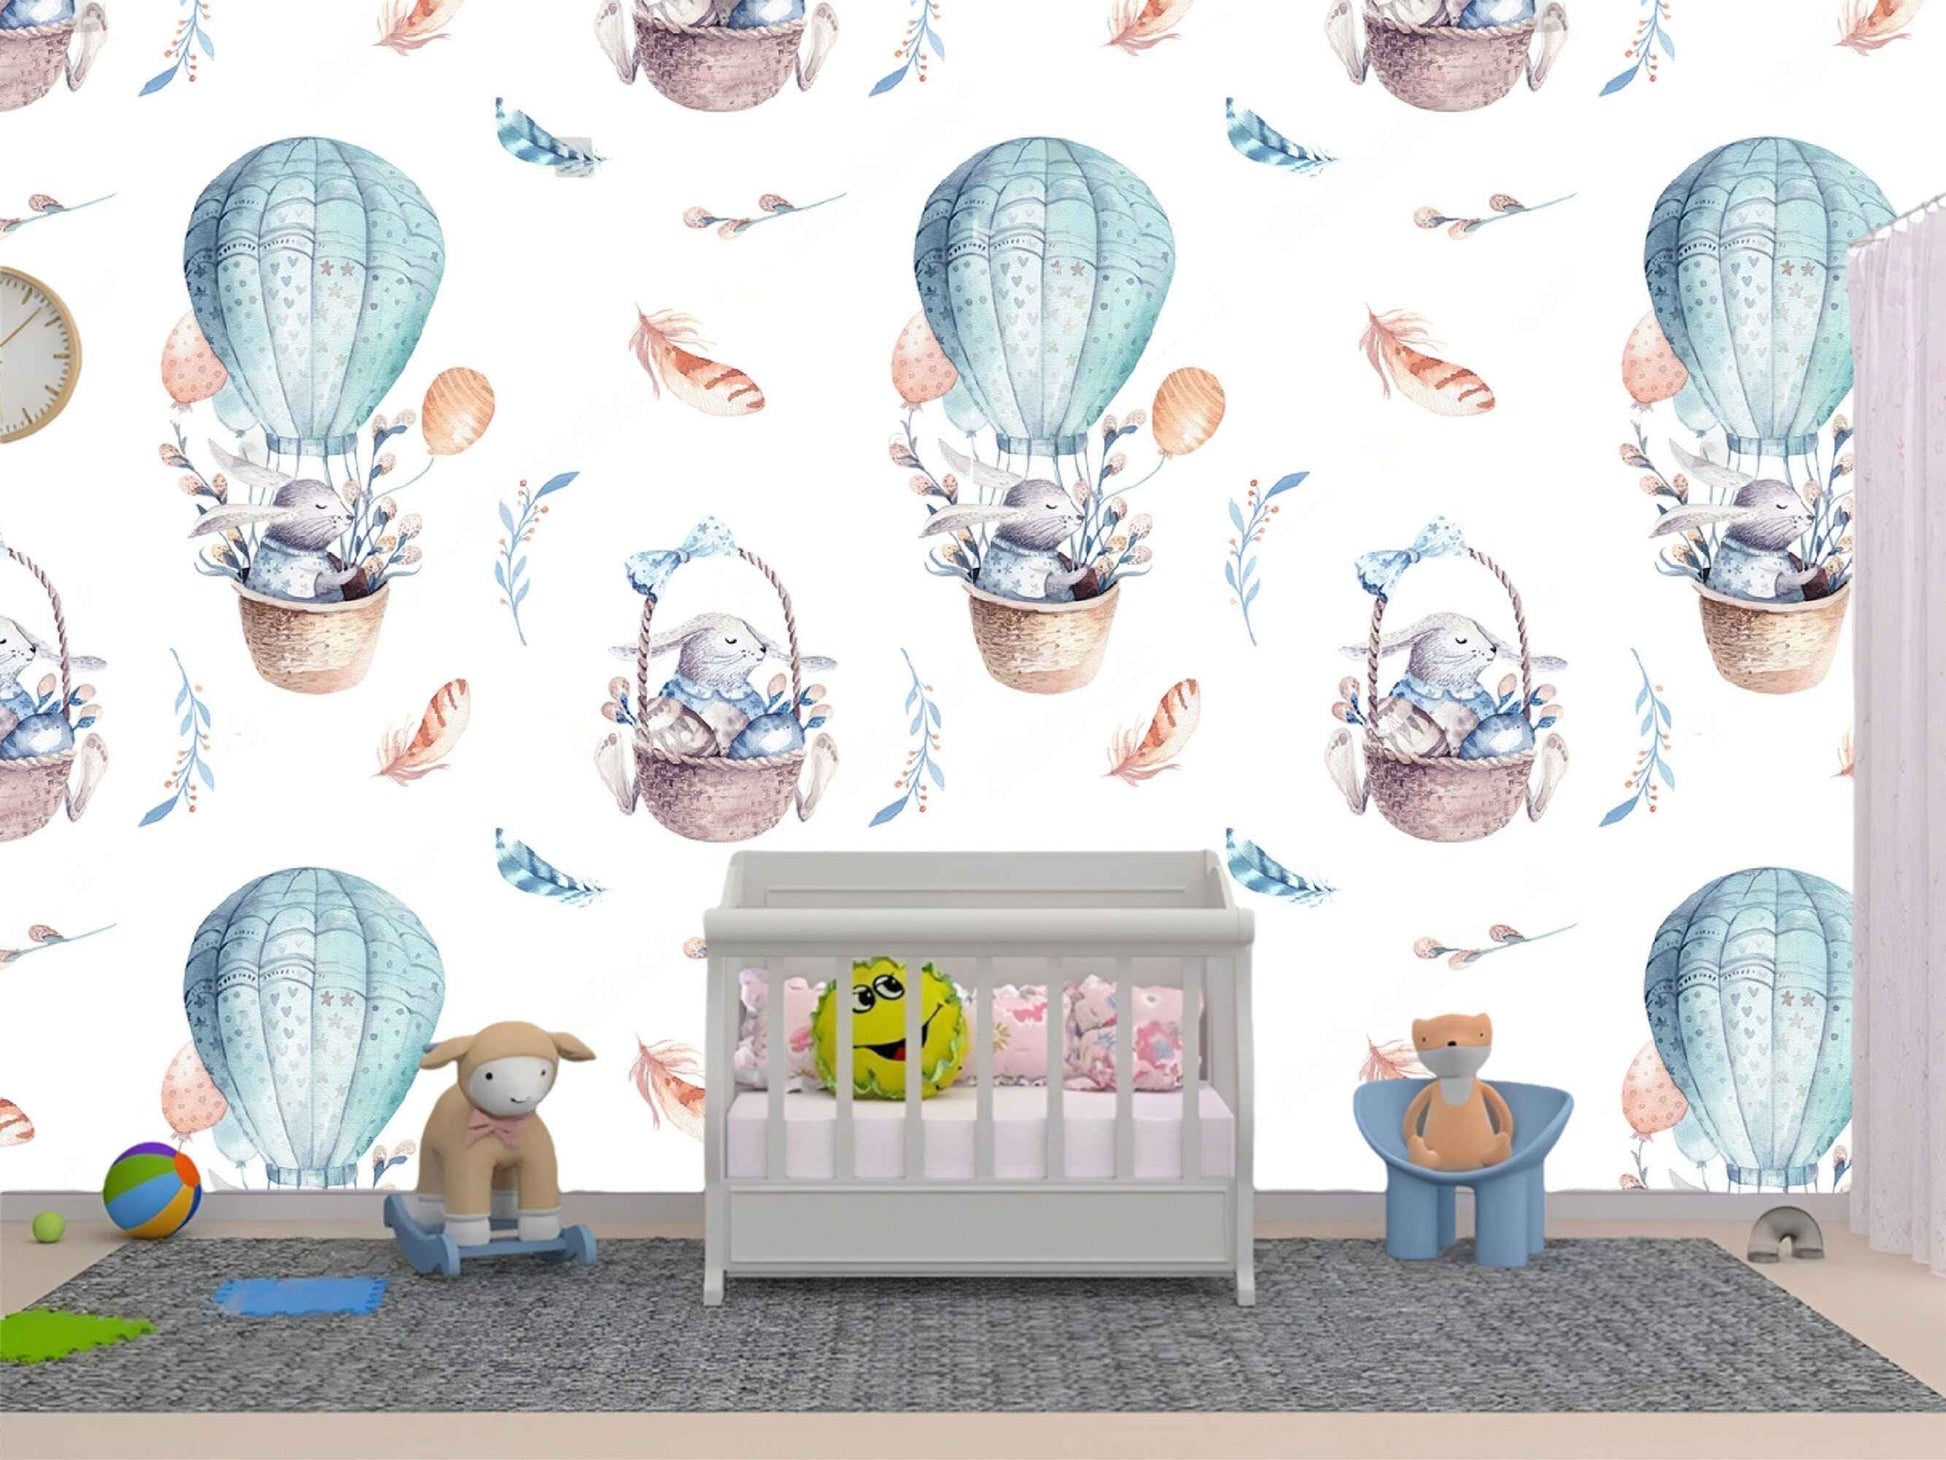 Whimsical balloon theme bedroom wallpaper, creating a delightful and imaginative ambiance.